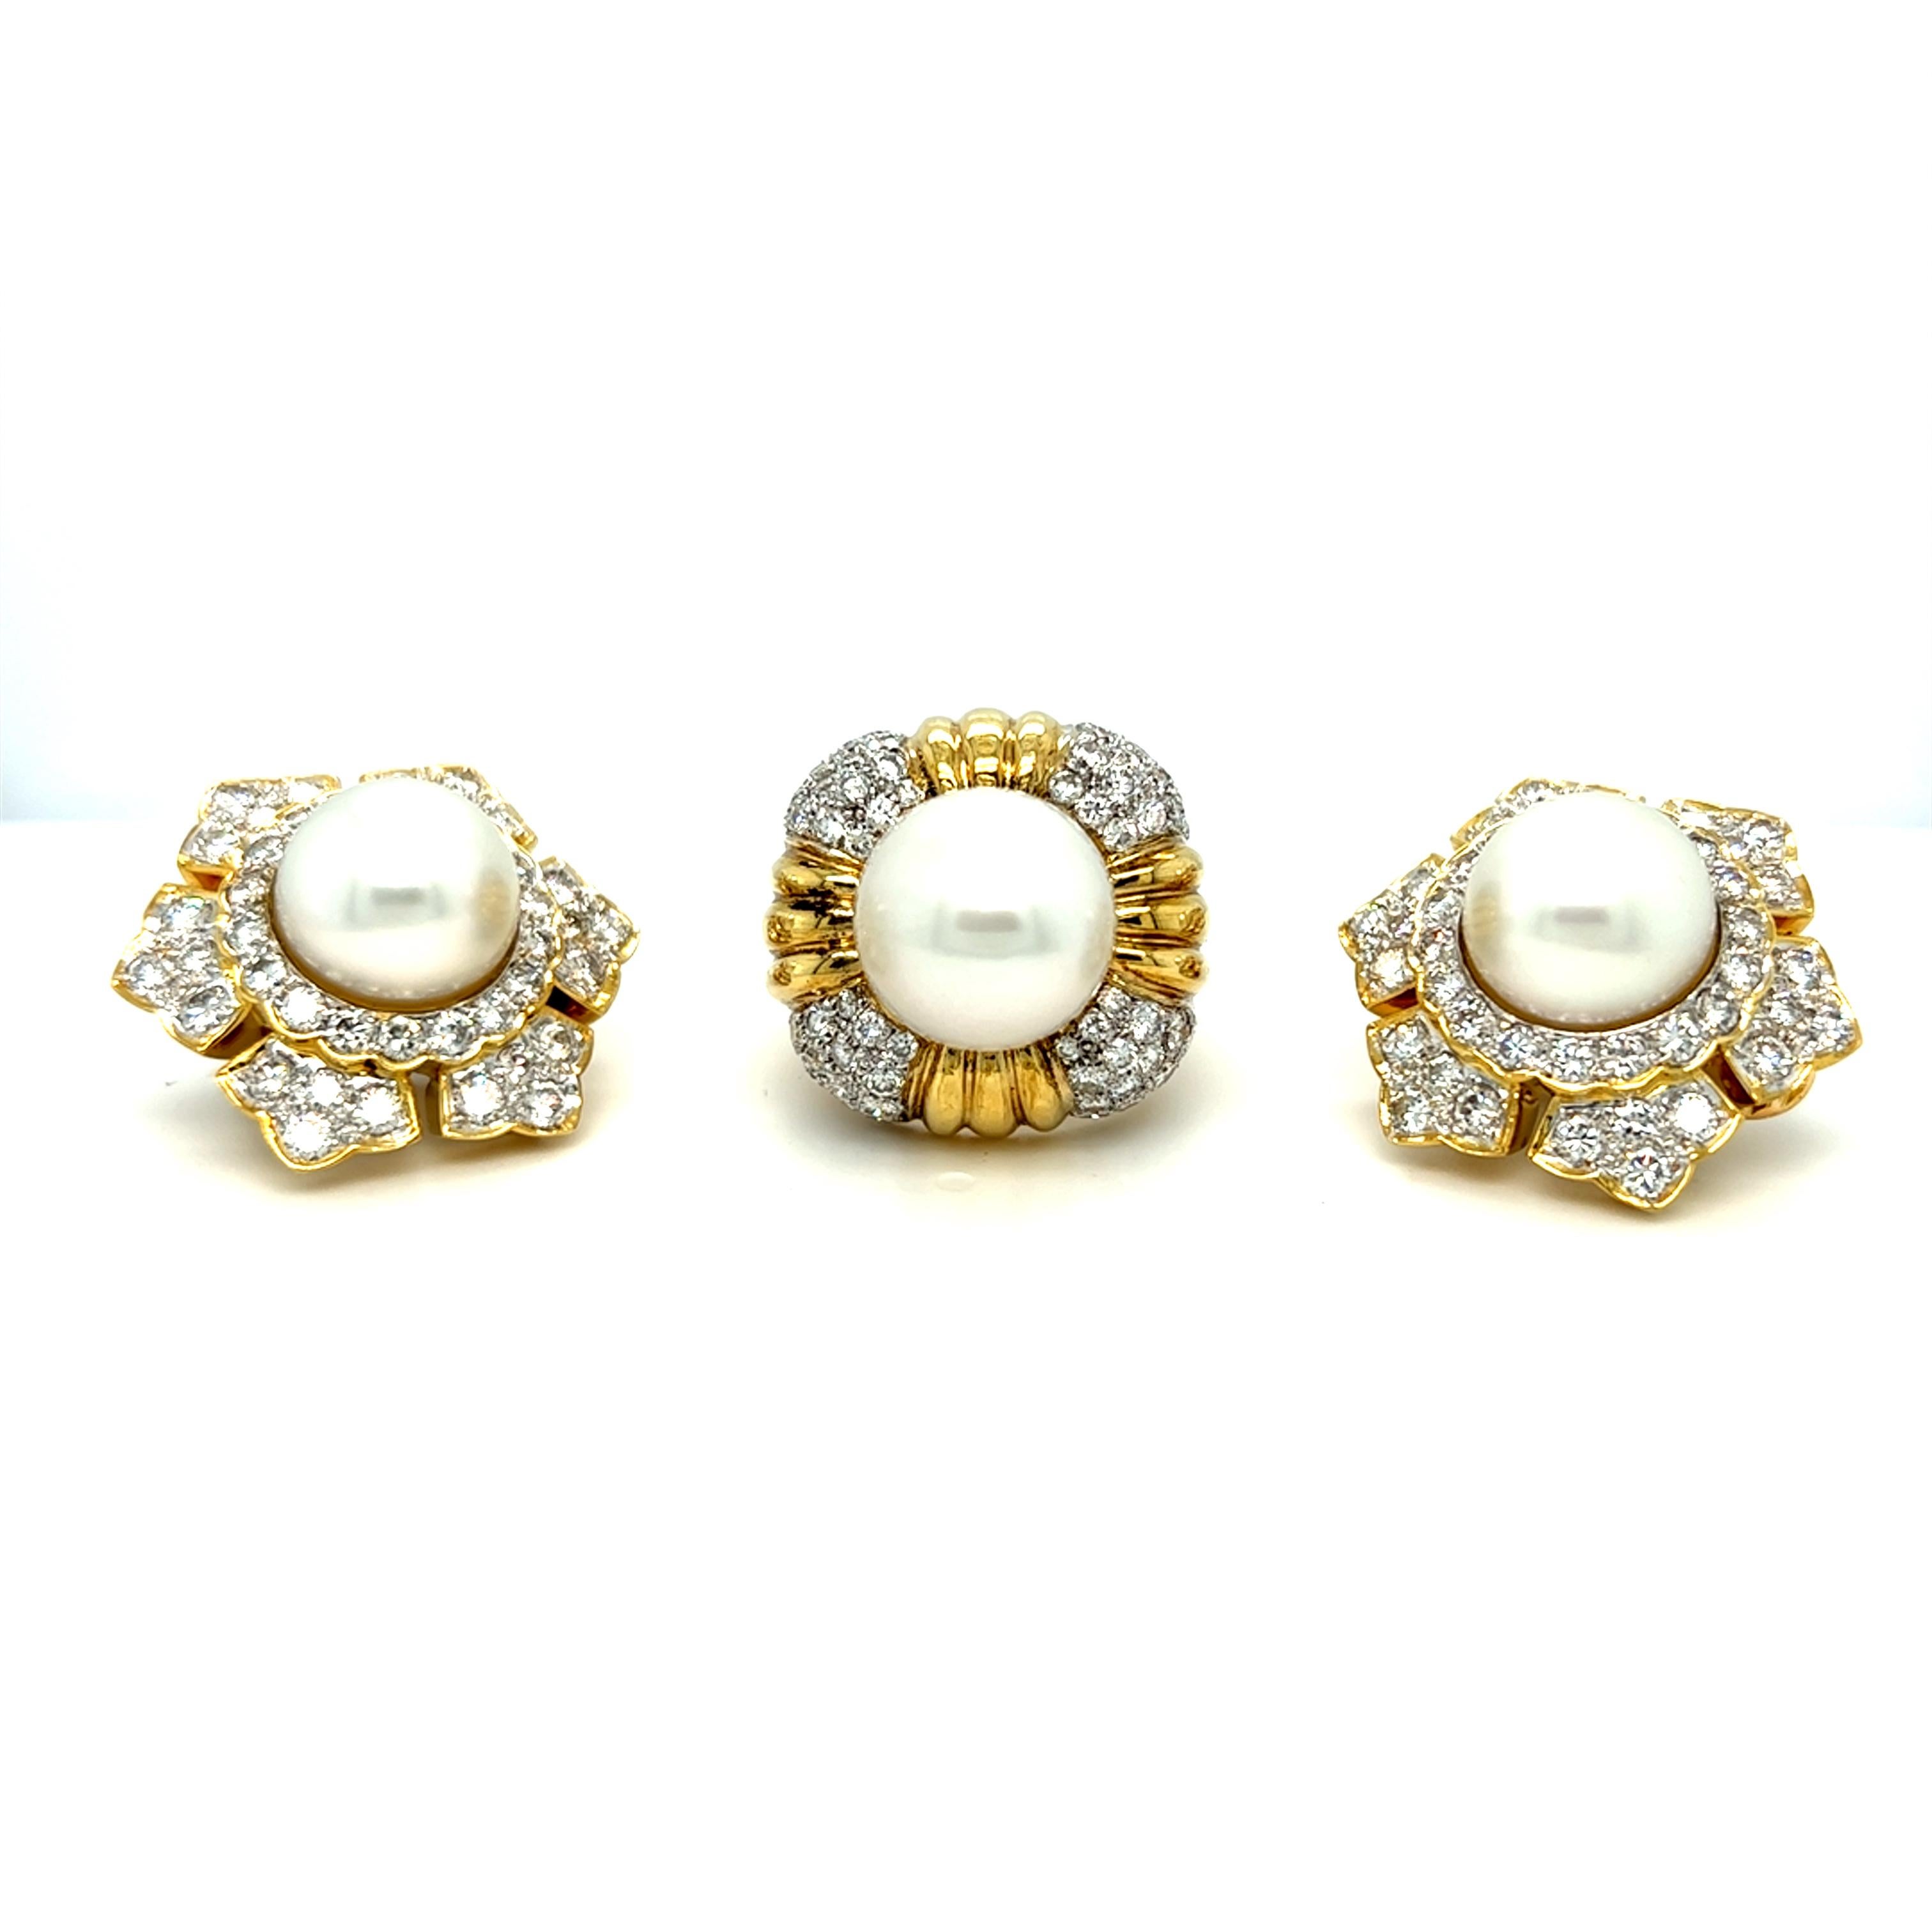 This fabulously elegant suite of estate ring and earrings are handcrafted in 18k yellow gold weighing 56 grams in total.  

These head-turner earrings each displays a stunning starburst of approximately 9 carat total diamond with a 12.6 mm beautiful